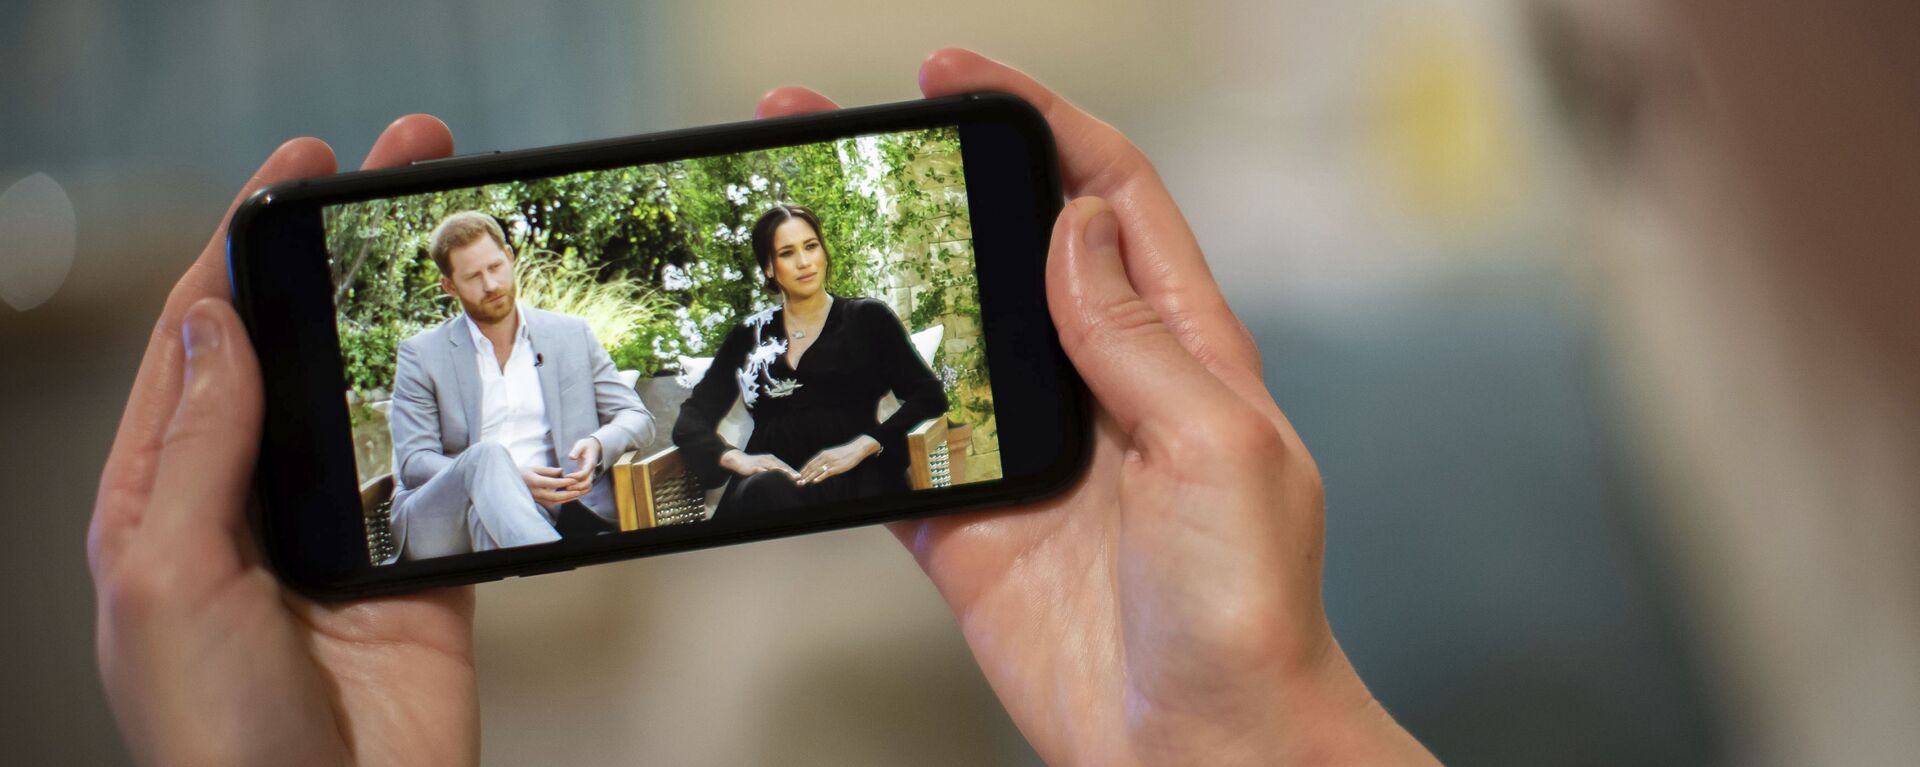 A man watches a phone screen showing an interview of Prince Harry and Meghan, The Duchess of Sussex, by Oprah Winfrey, in London Monday, March 8, 2021. - Sputnik International, 1920, 03.04.2021